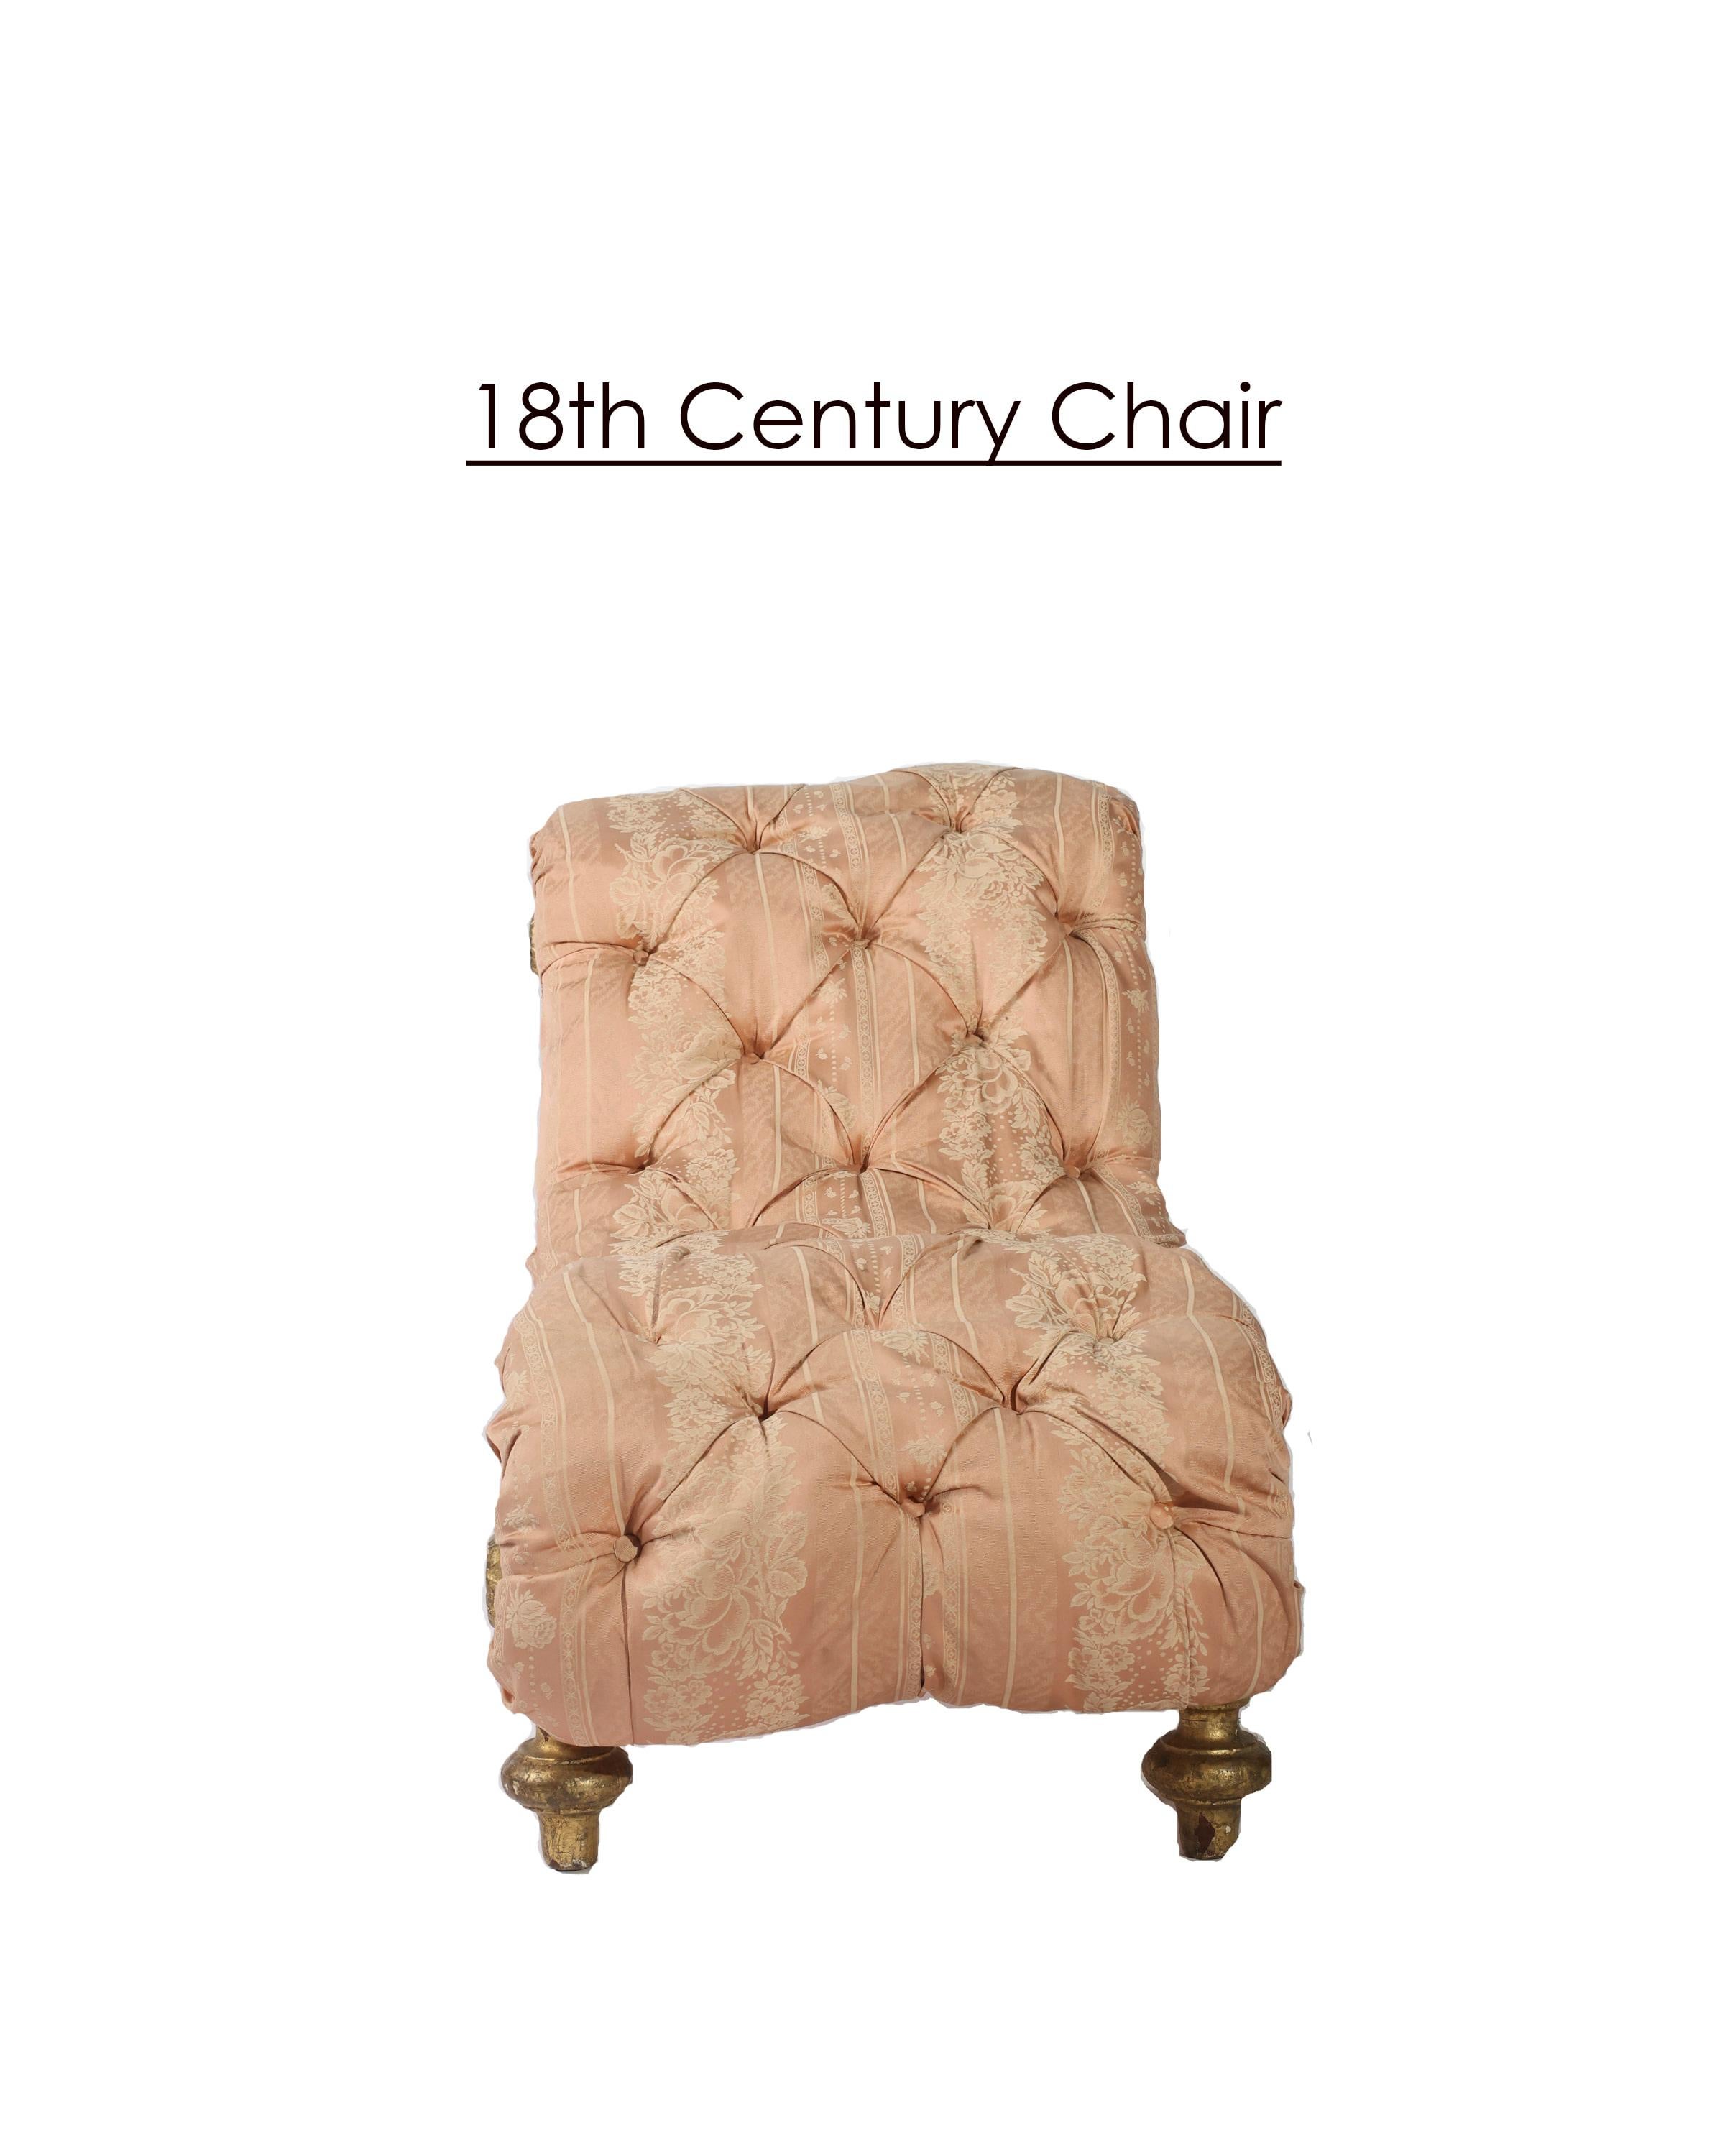 A lovely petite French chaise upholstered in tufted pink silk with some visible signs of wear, the curvaceous gilt base cradles the cloud of down filled tufted upholstery. Purchased from a chateau in France, this sweet small chaise would make a